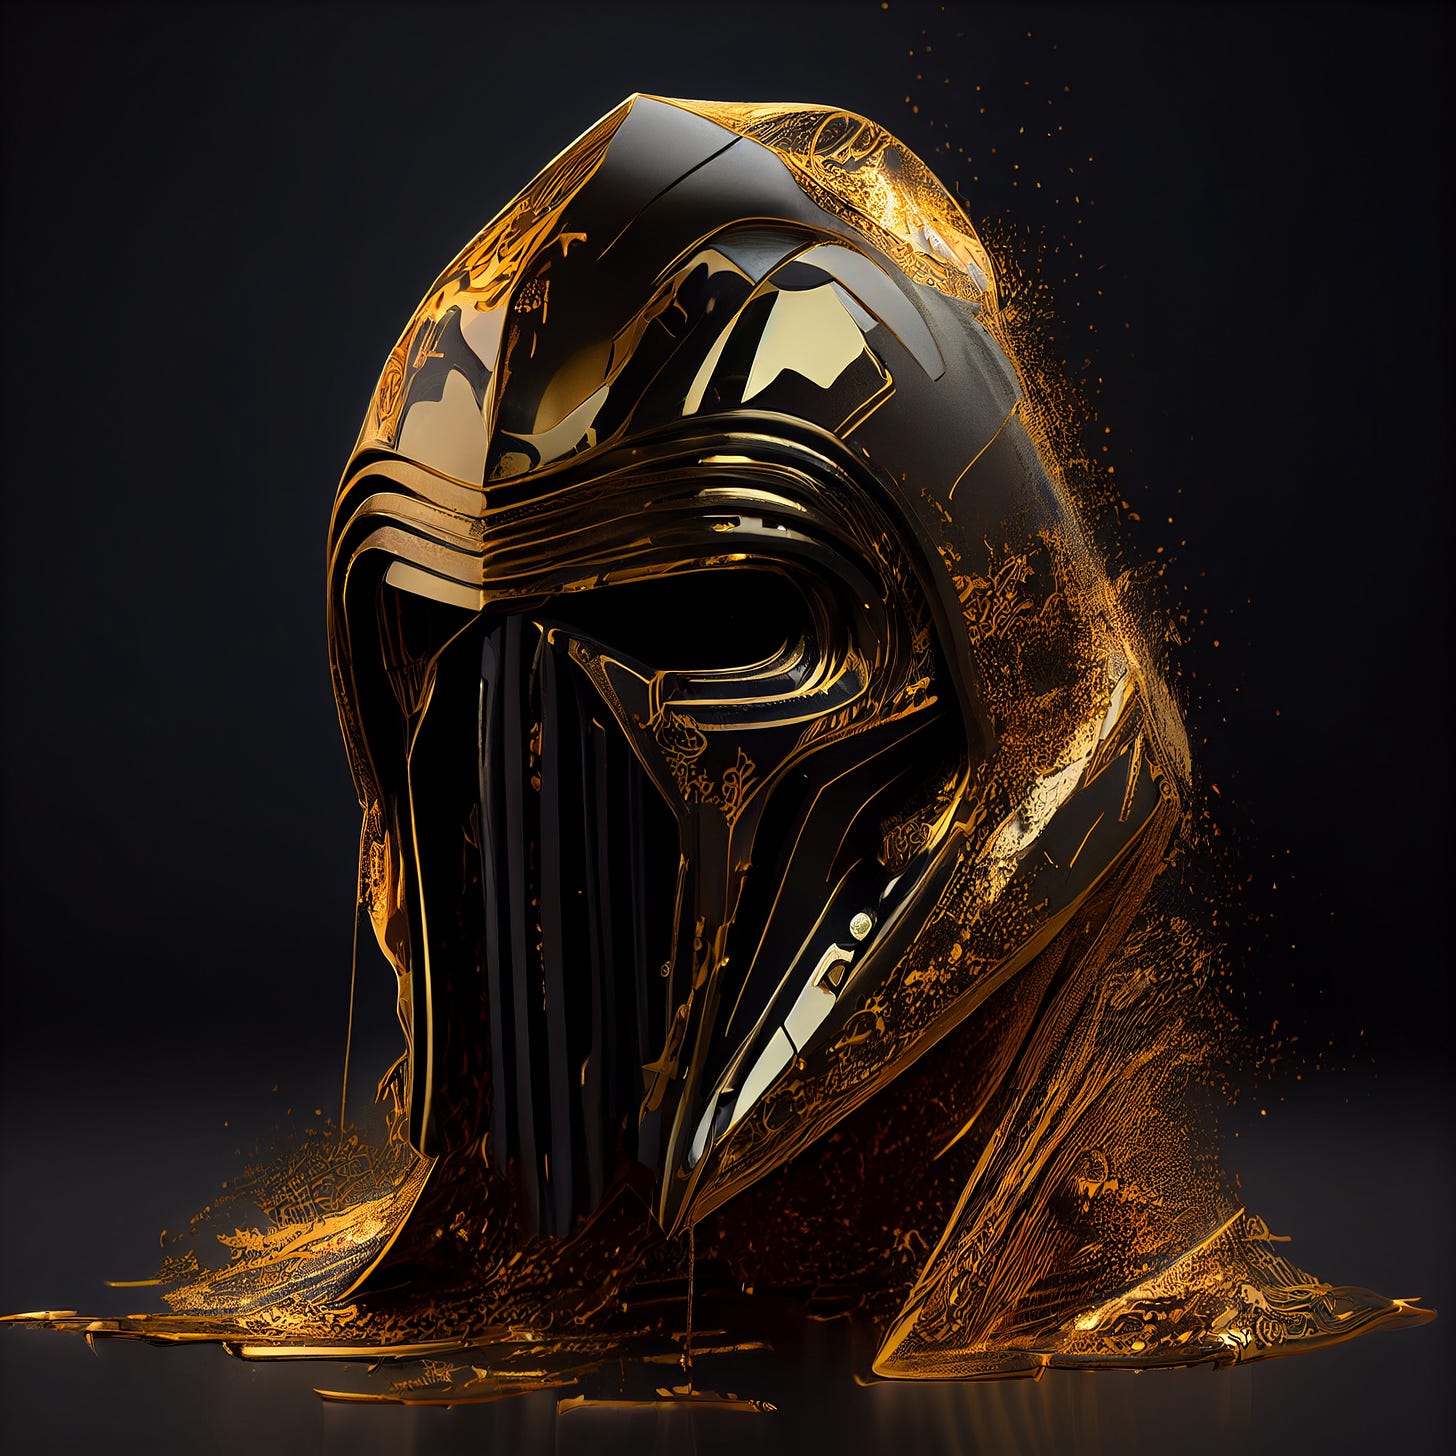 Kylo Ren helmet made of solid gold, dripping with melting gold, intricate, elegant, photorealistic, studio lighting, dark background, 8k